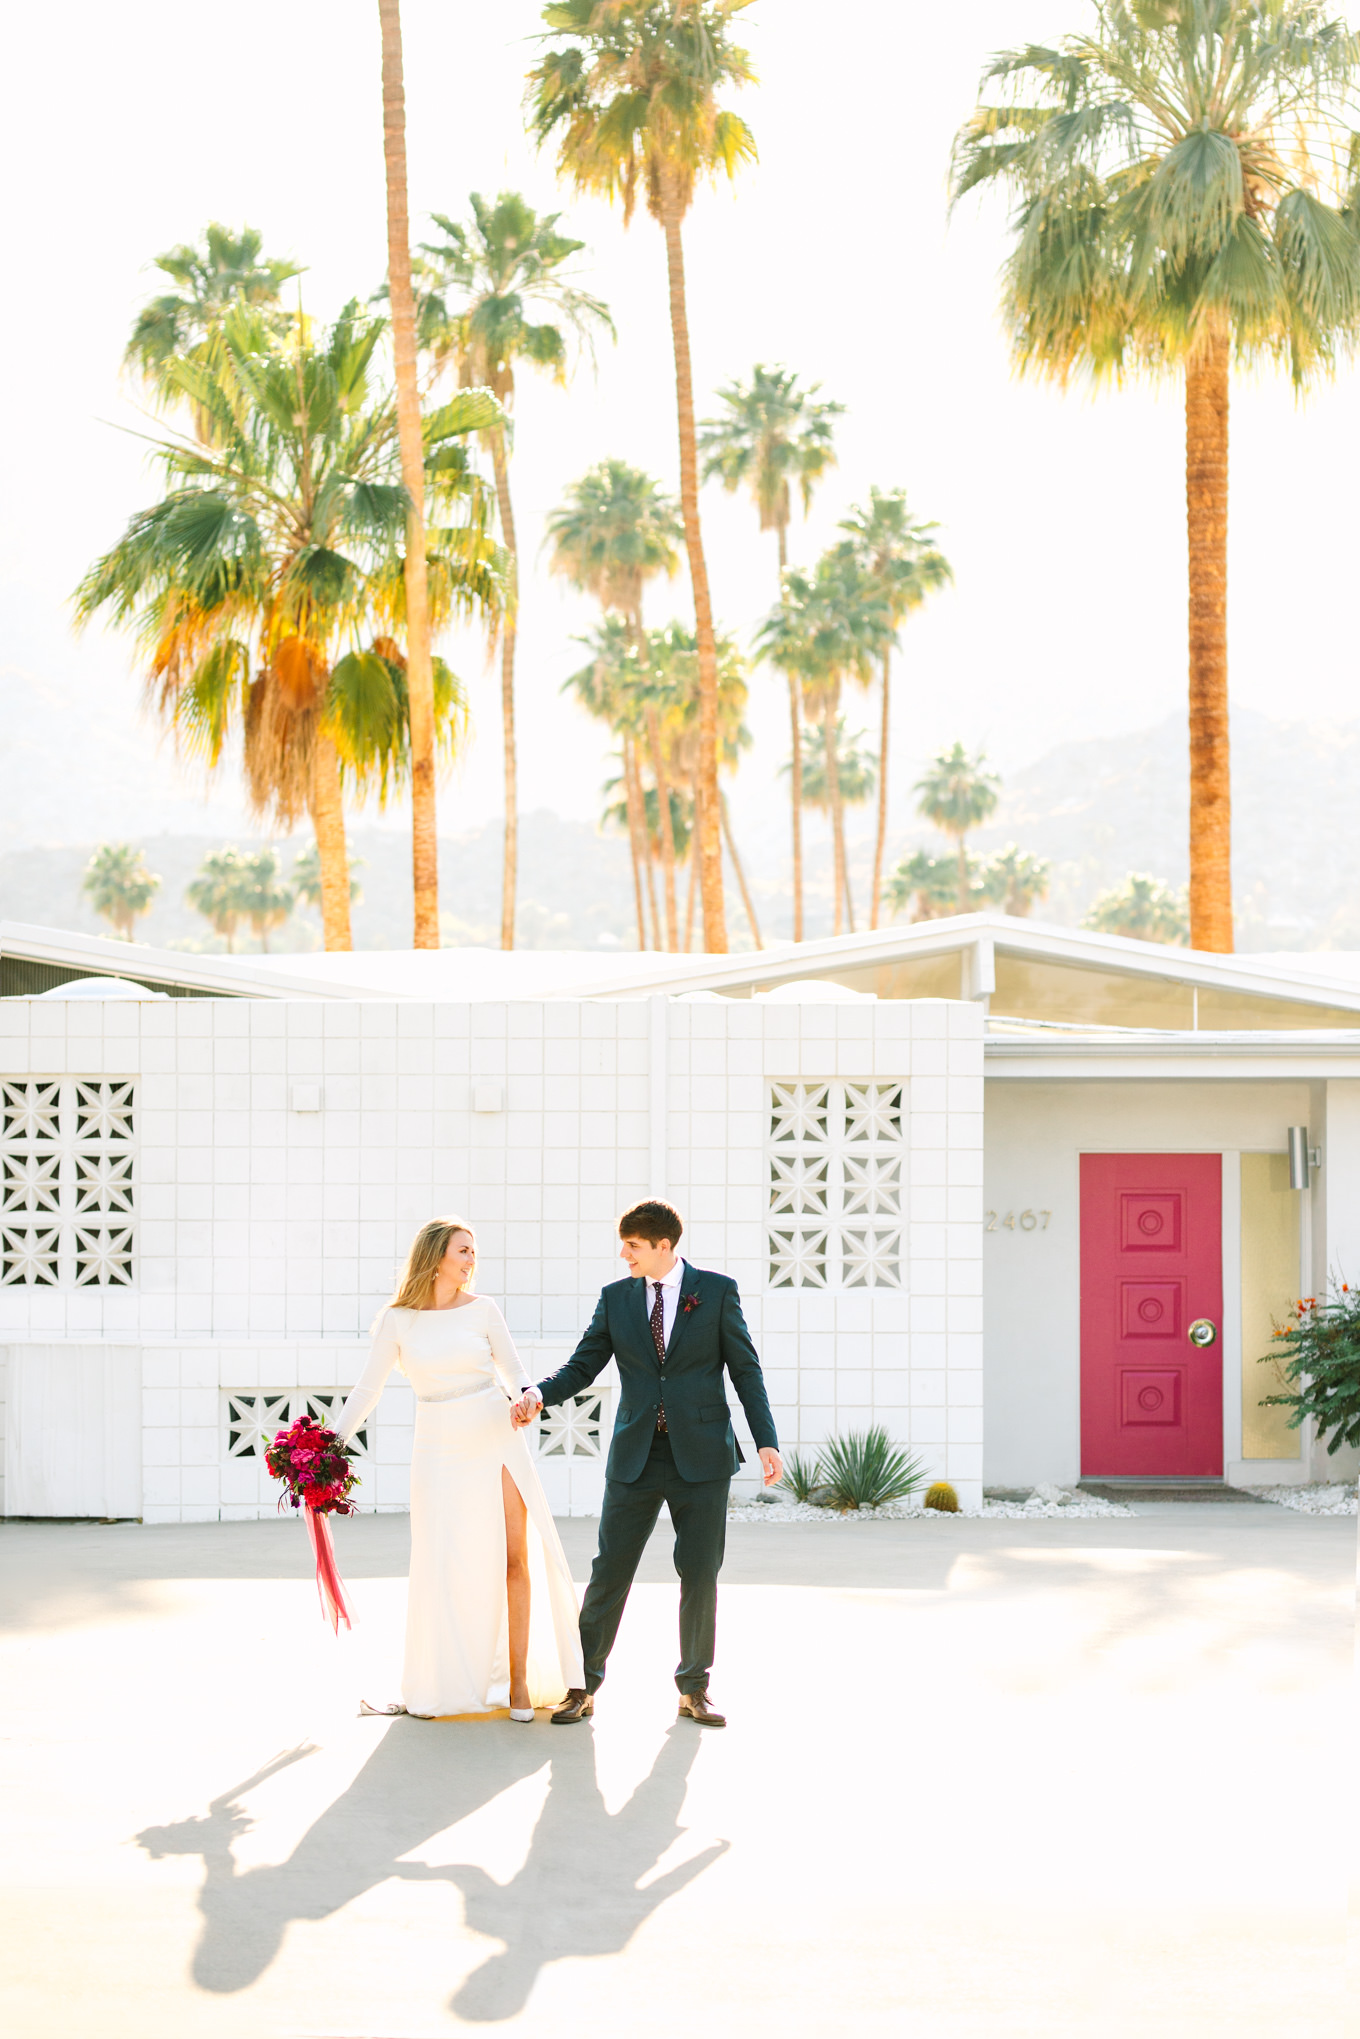 Bride and groom walking in Mid-Century Modern neighborhood with pink door | Colorful jewel tone Palm Springs elopement | Fresh and colorful photography for fun-loving couples in Southern California | #colorfulelopement #palmspringselopement #elopementphotography #palmspringswedding Source: Mary Costa Photography | Los Angeles